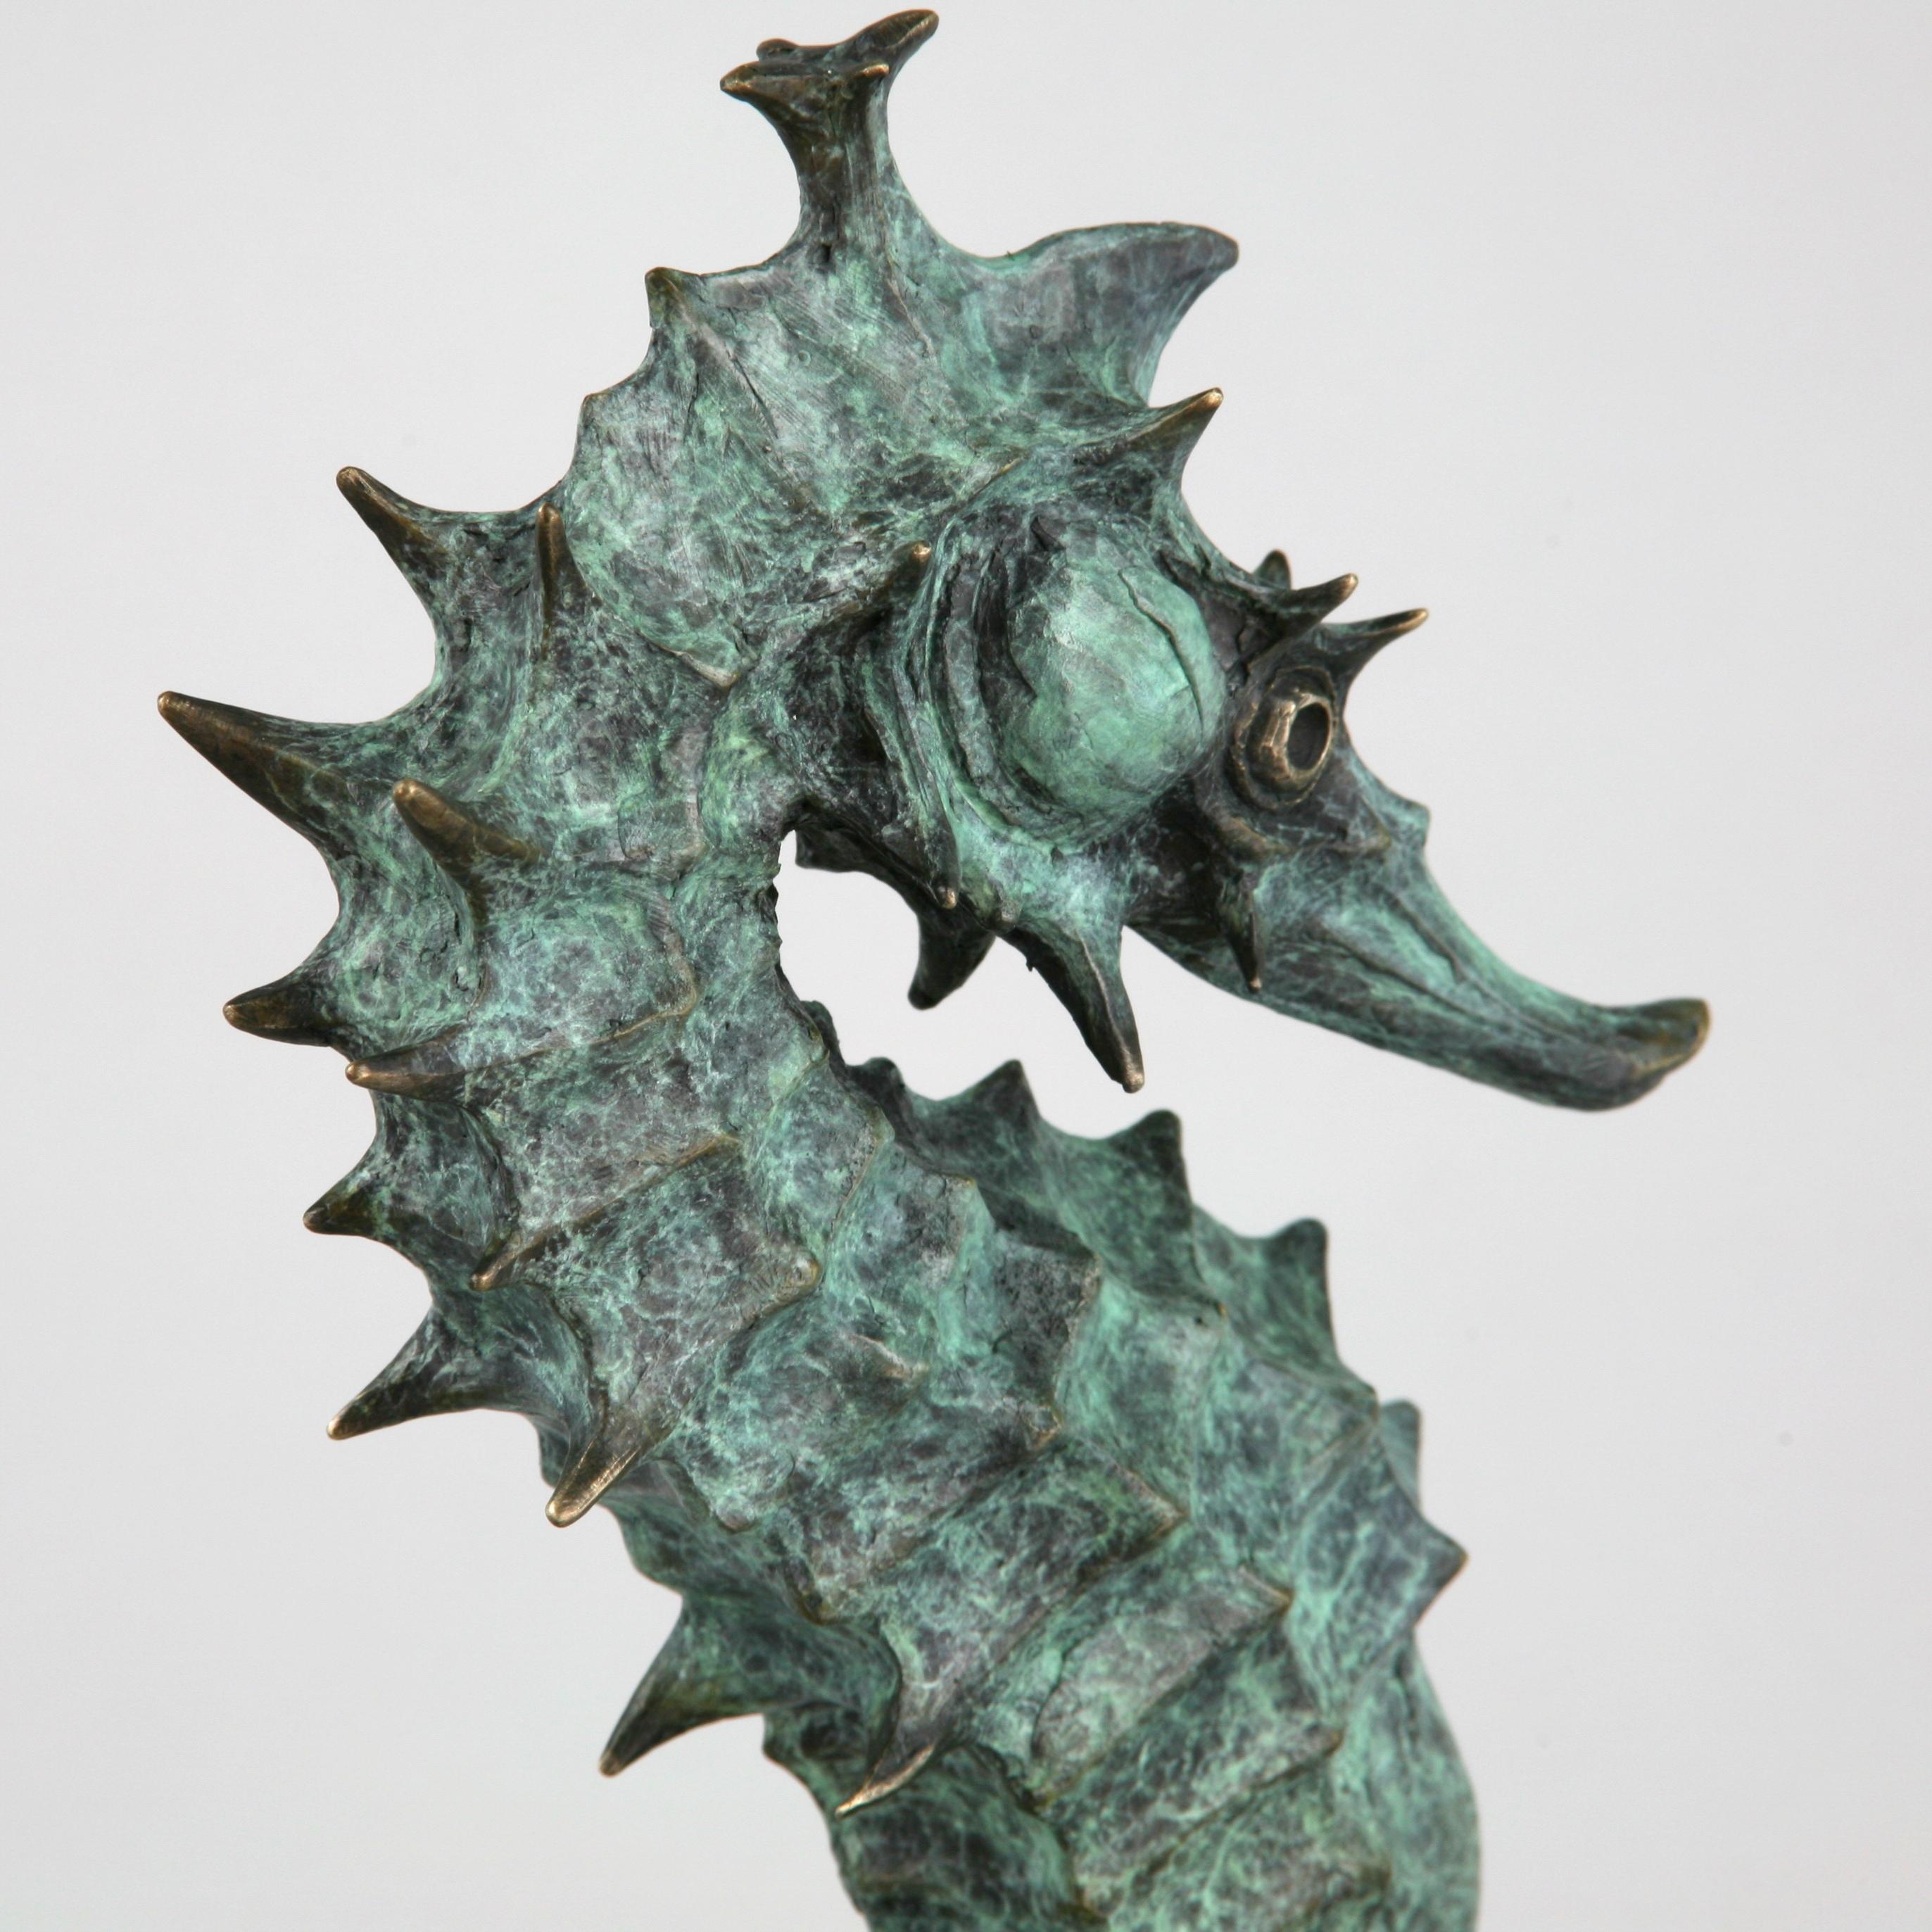 This contemporary marine sculpture by Andrzej Szymczyk depicts a seahorse and is expertly cast in bronze. The free standing piece is finished with a serene green coating, a hue reminiscent of its natural ocean environment, and features impressively